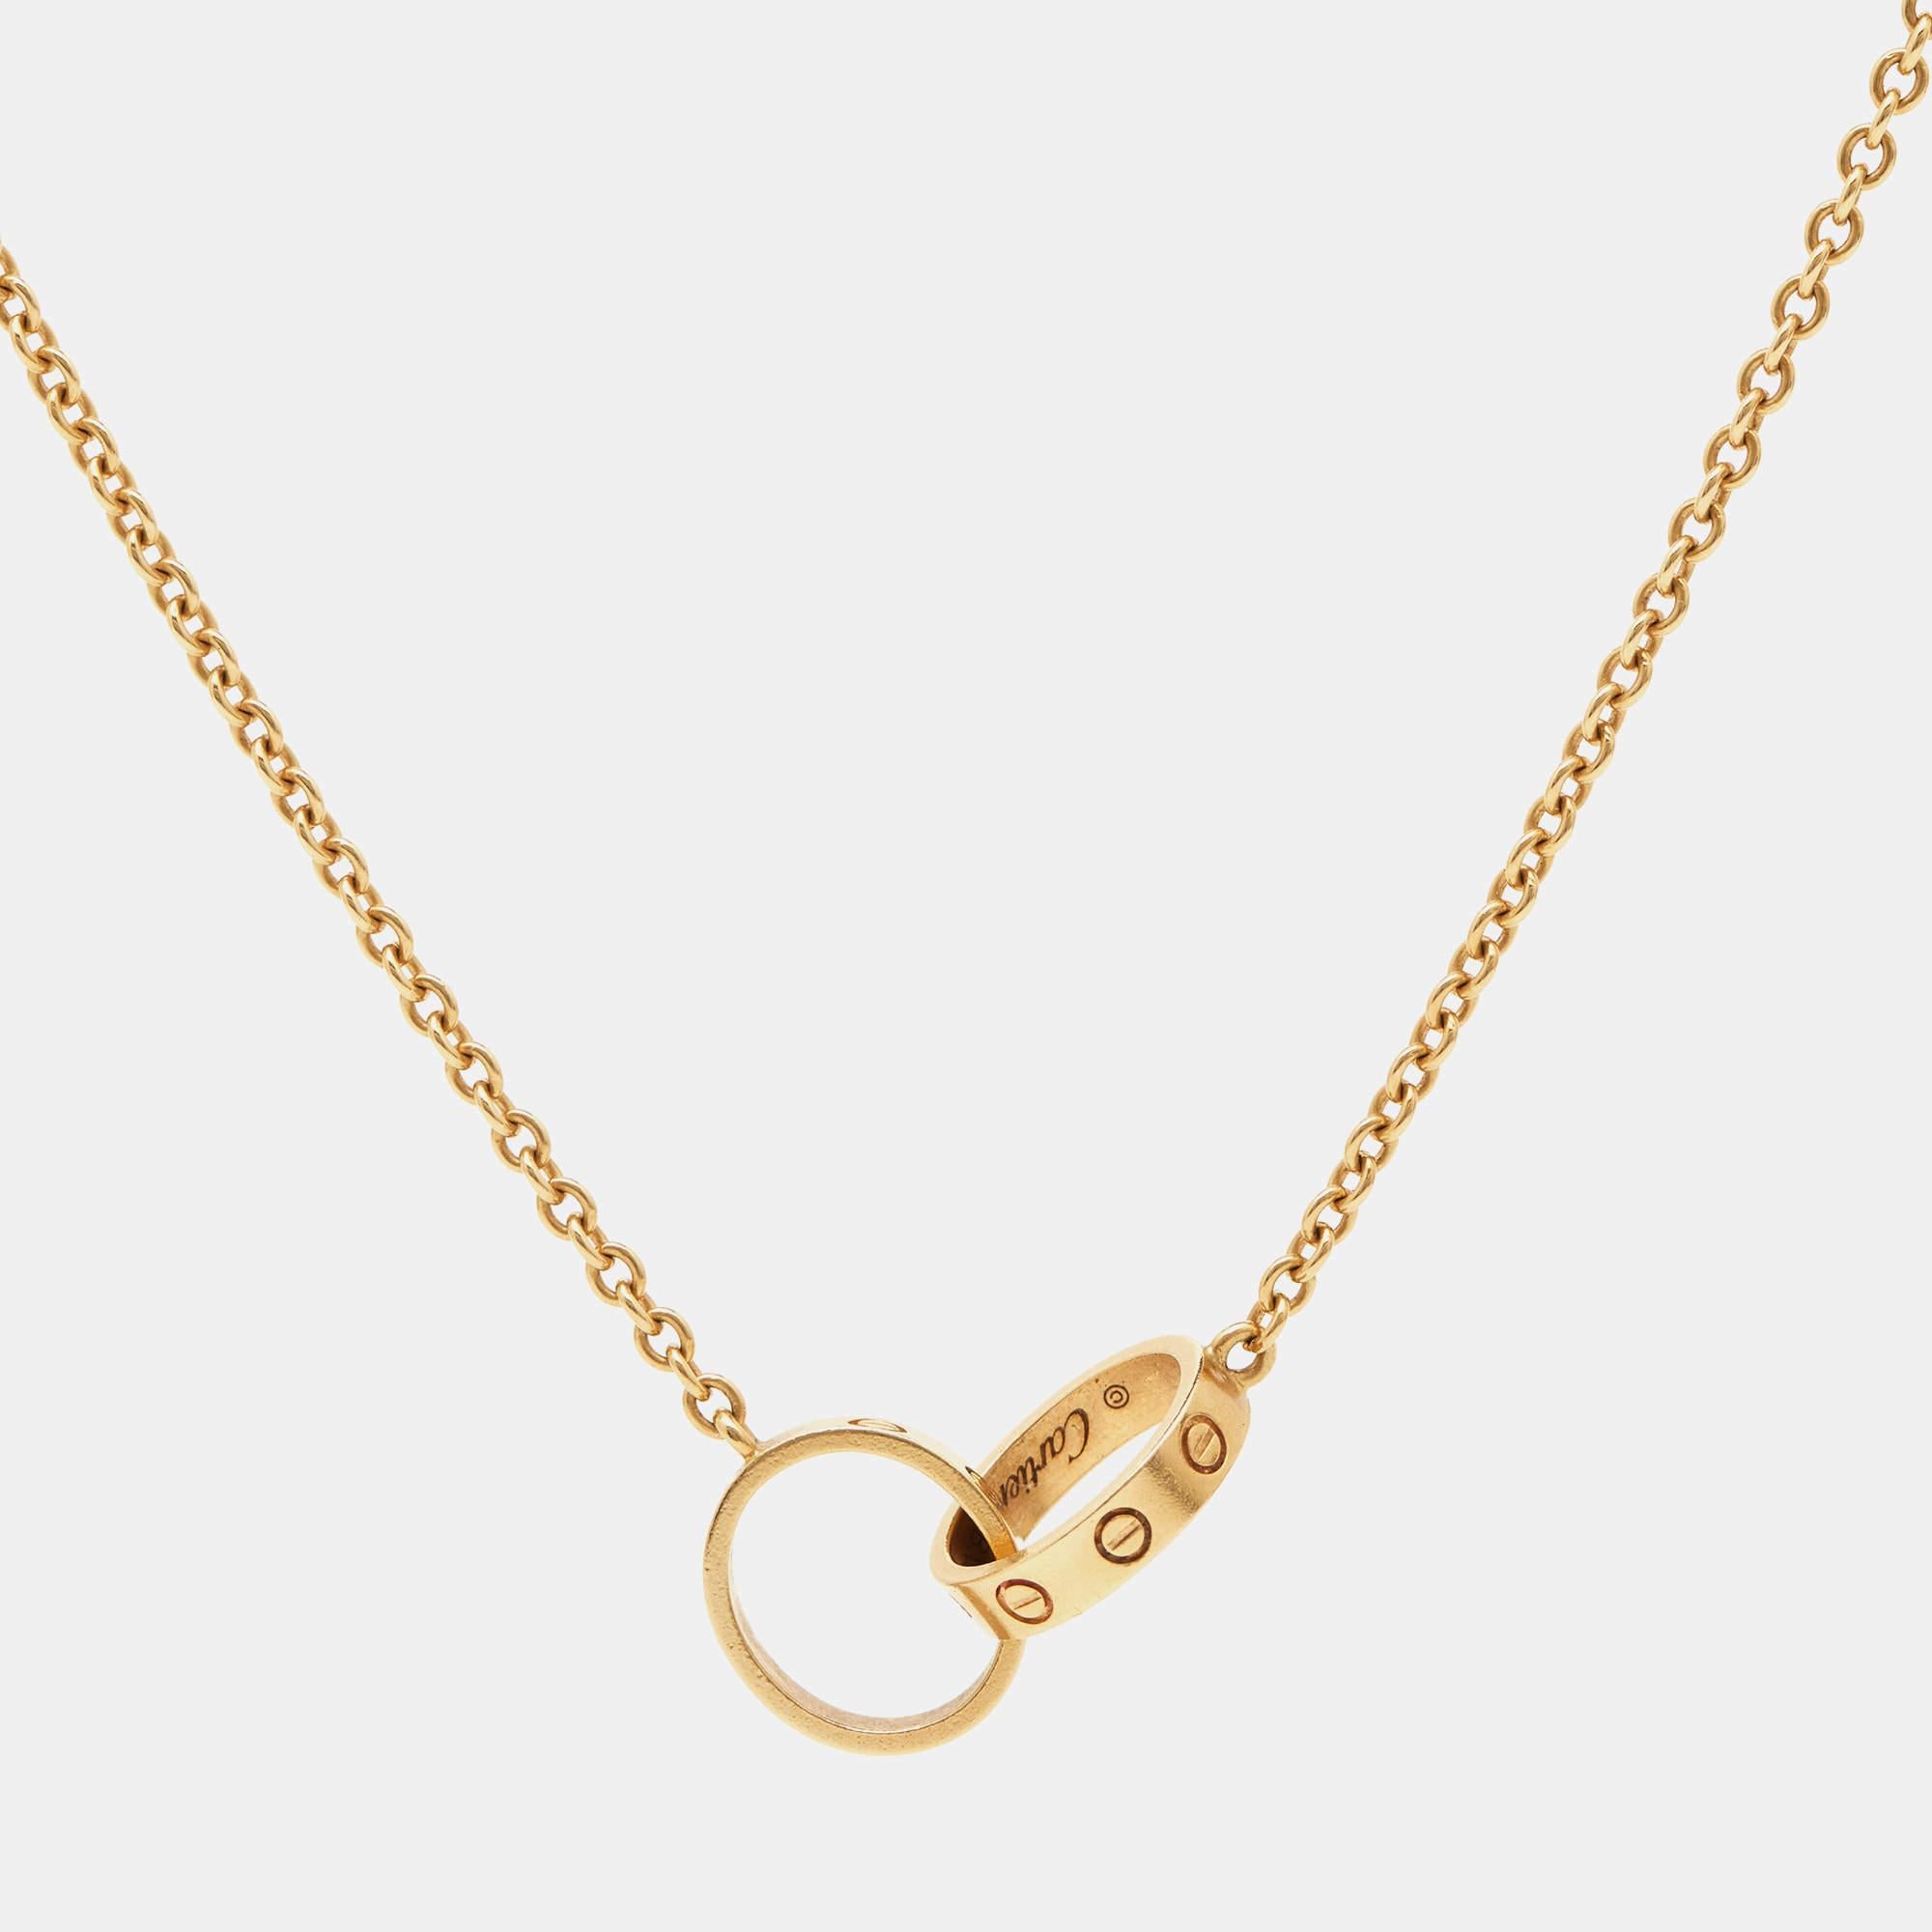 Celebrate timeless love with this necklace from Cartier's Love collection. It is made from 18k yellow gold, and the chain holds two magnificent loops interlocked with one another. Both the rings carry the iconic screw motifs, which are a signature